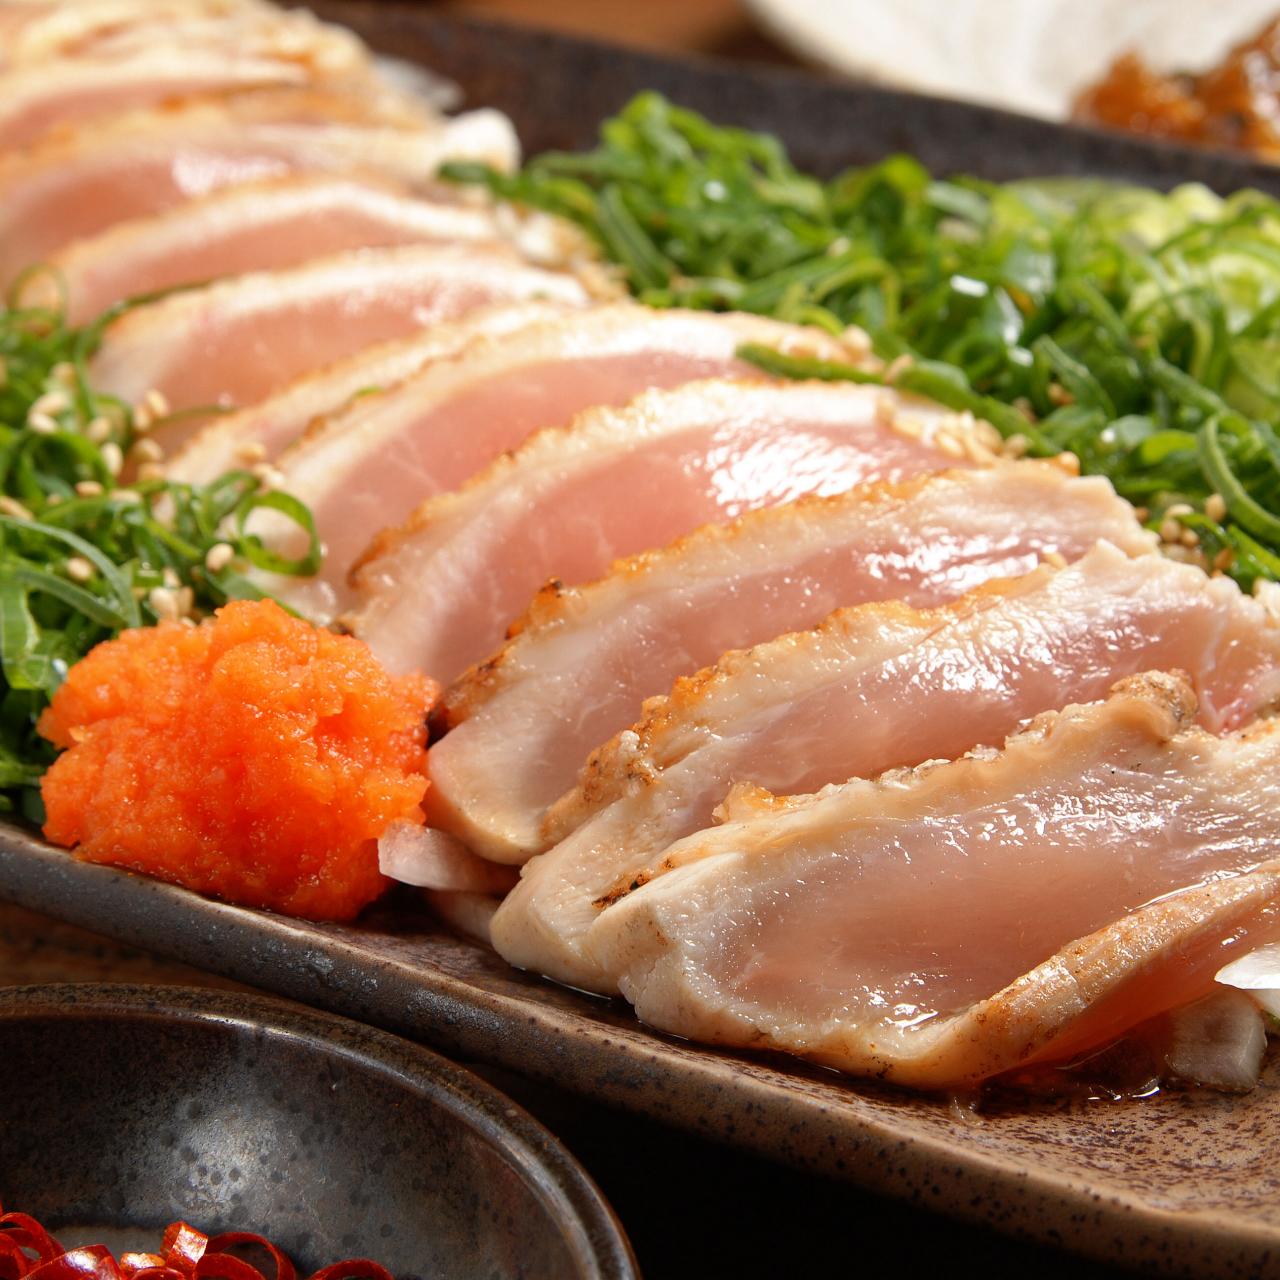 Is Eating Raw Fish Safe and Healthy?